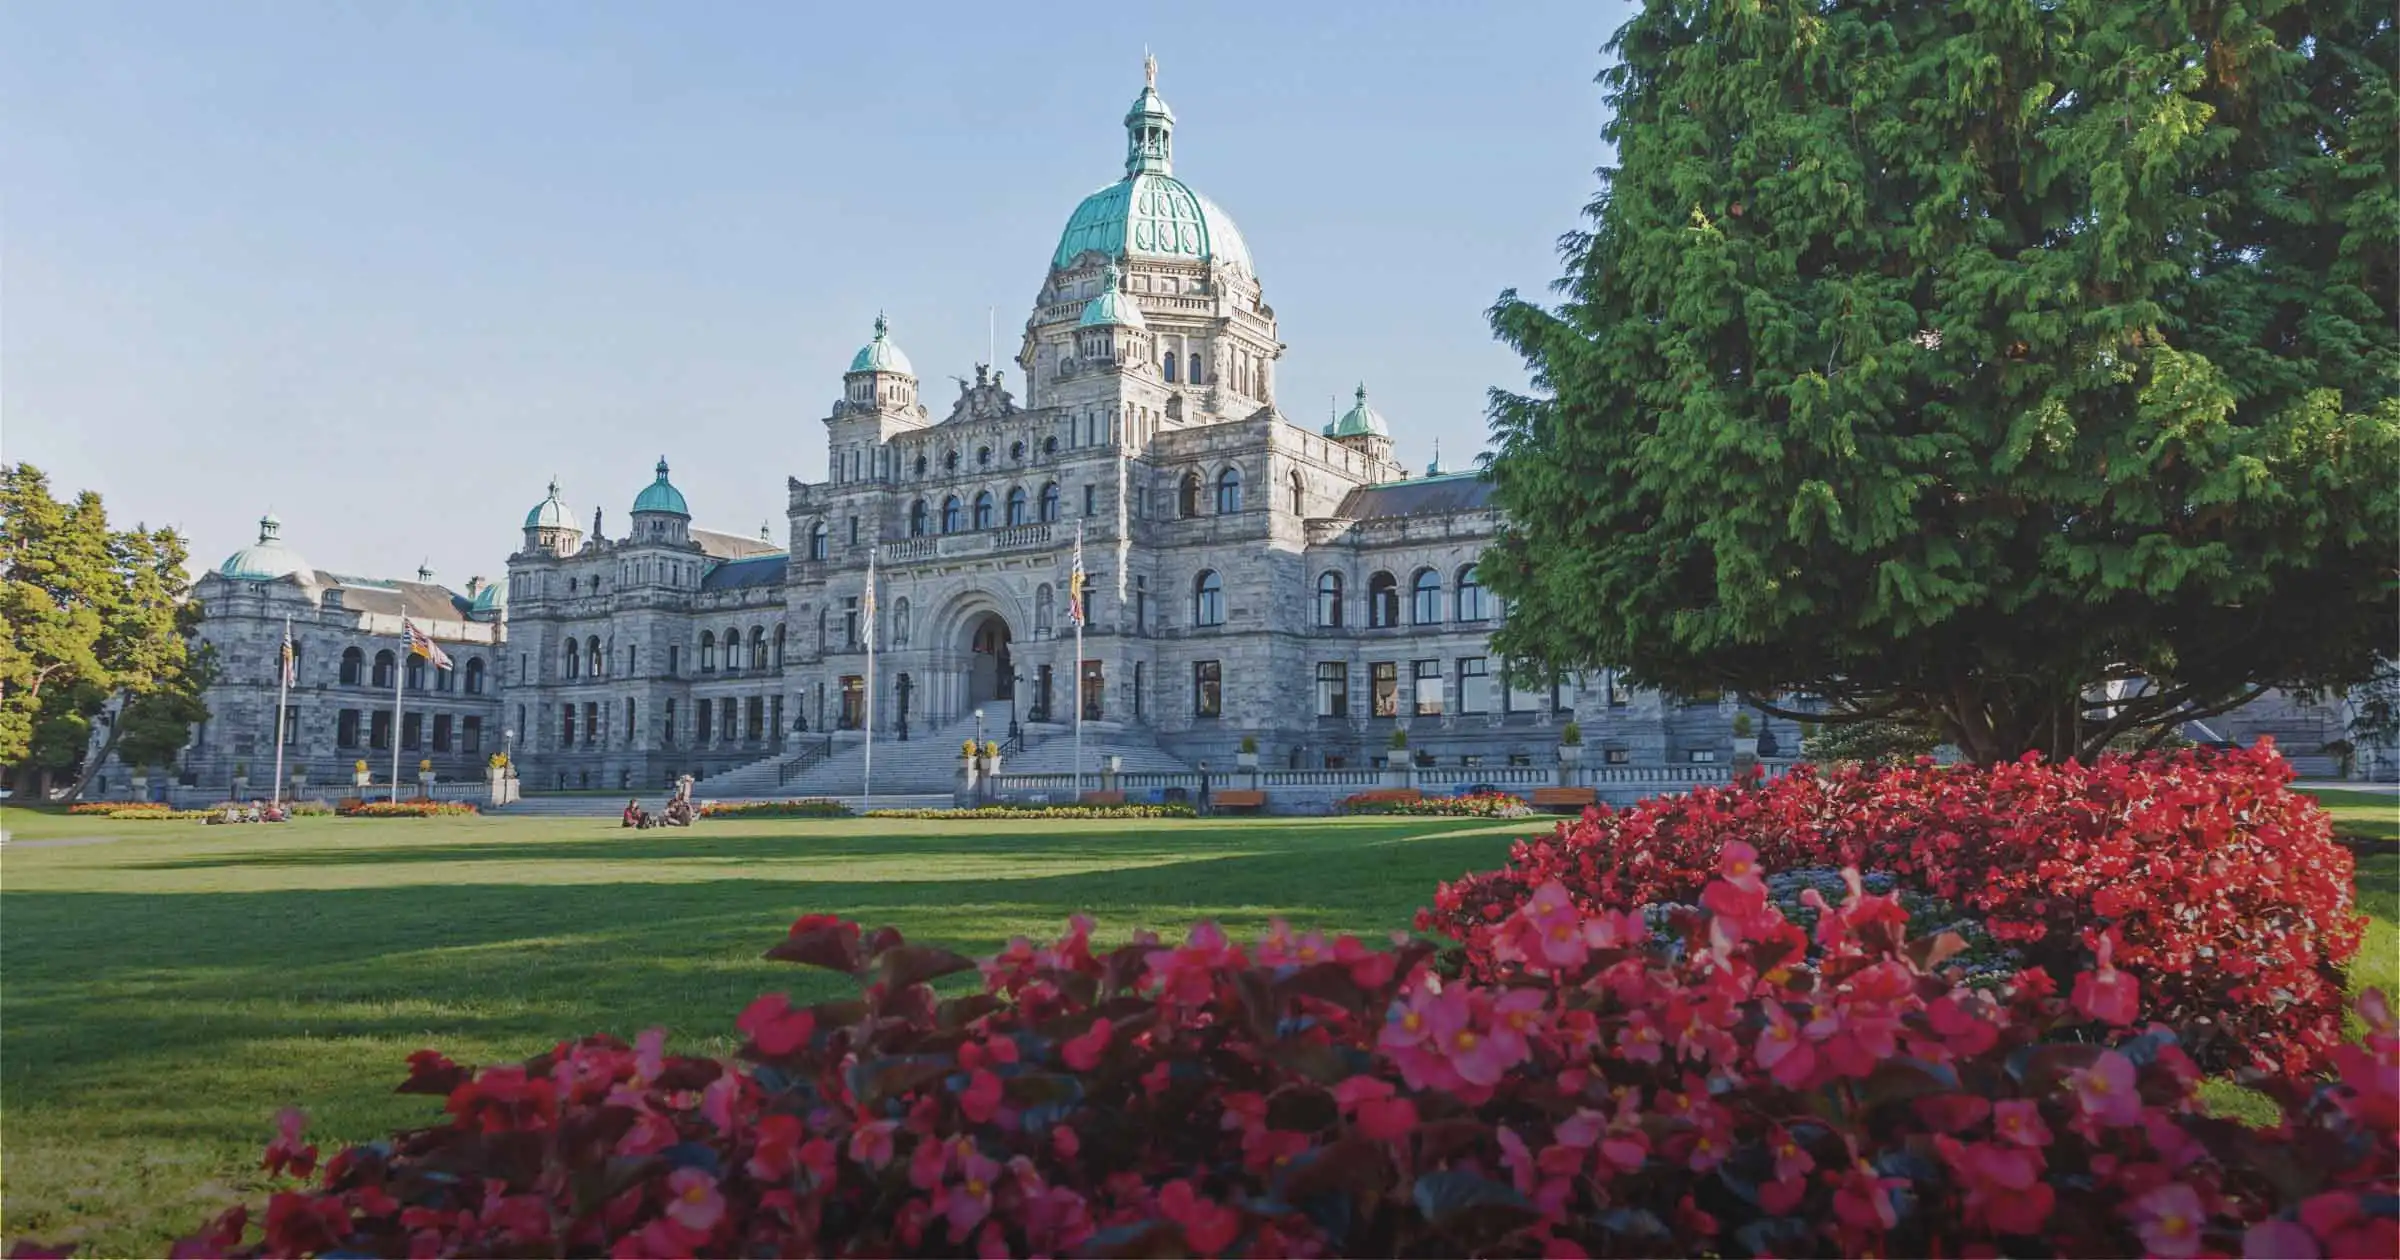 Photo of Victoria BC with flowers in the foreground.